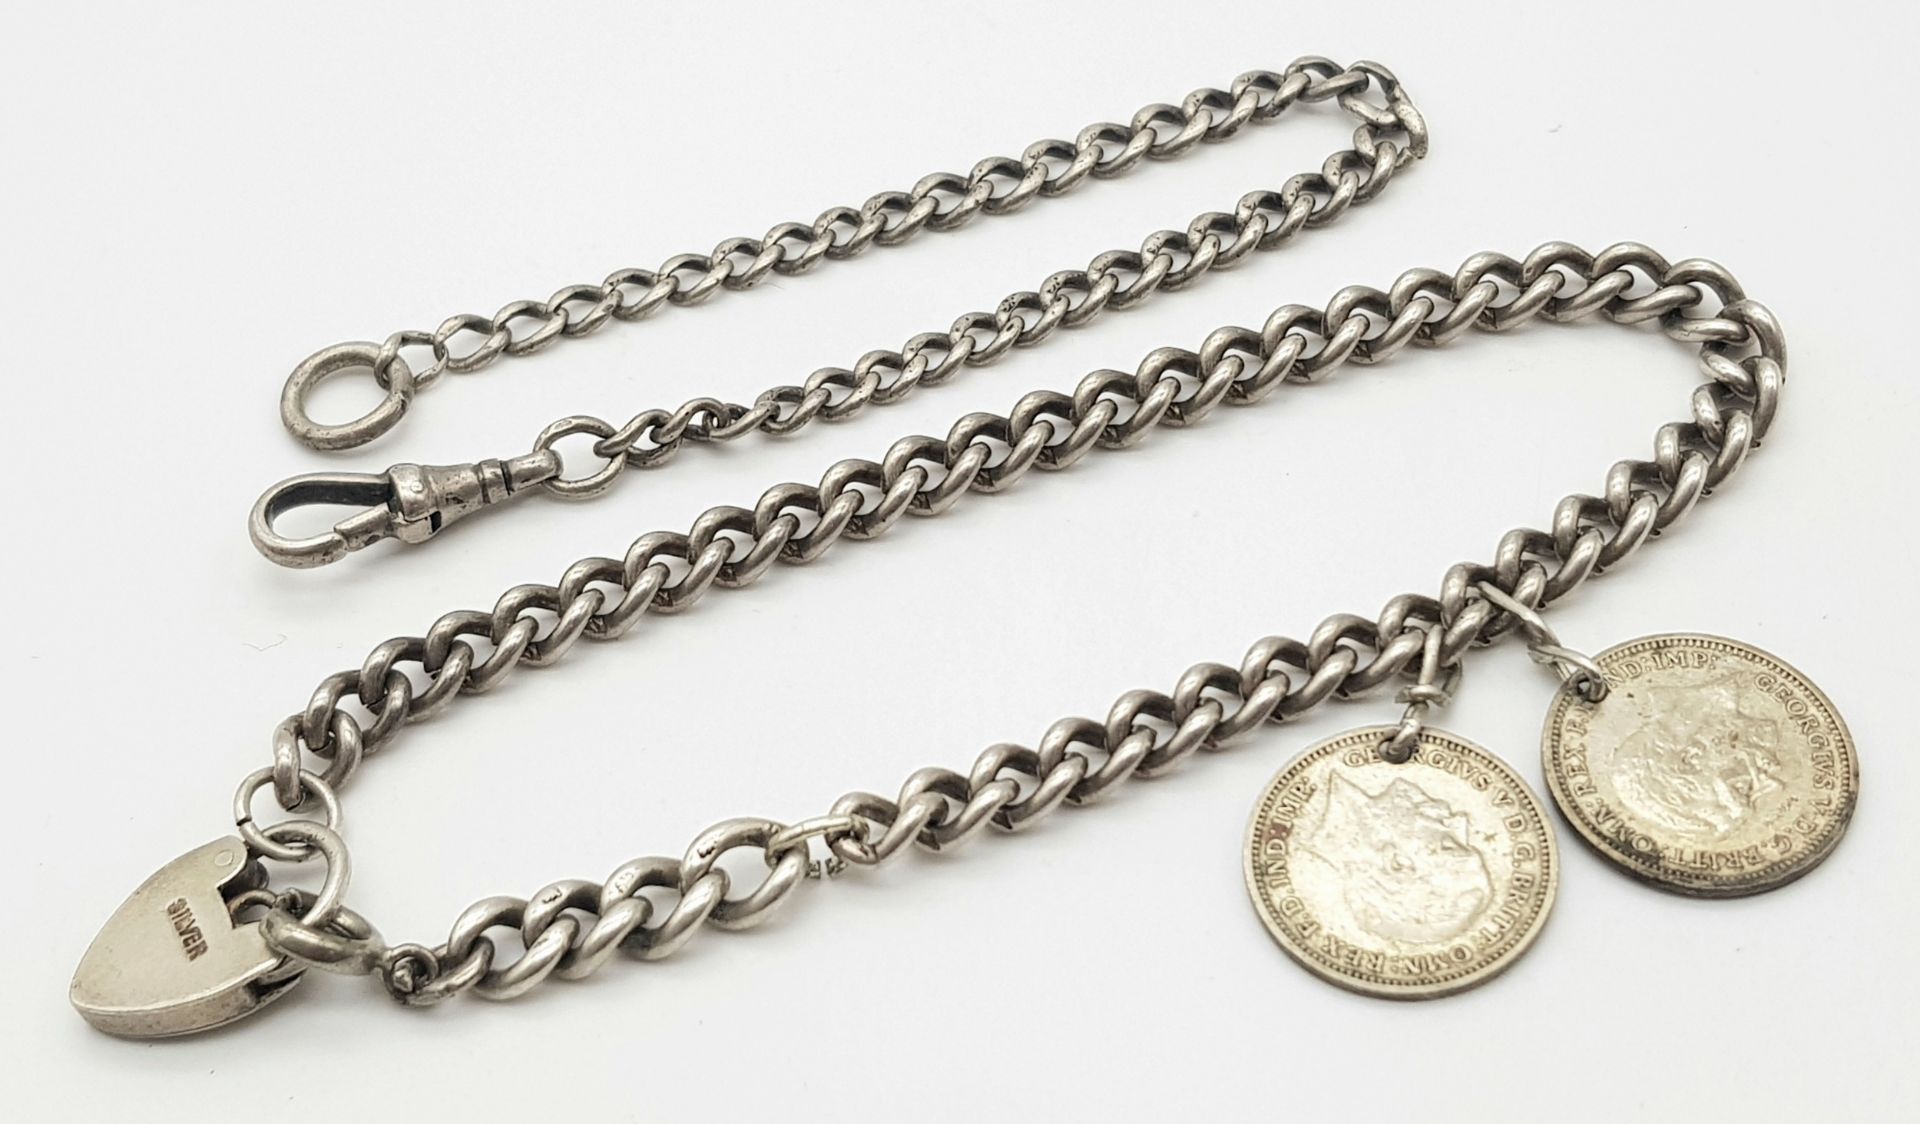 Two Vintage Sterling Silver Bracelets - One with heart clasp and two threepence coins. 22g